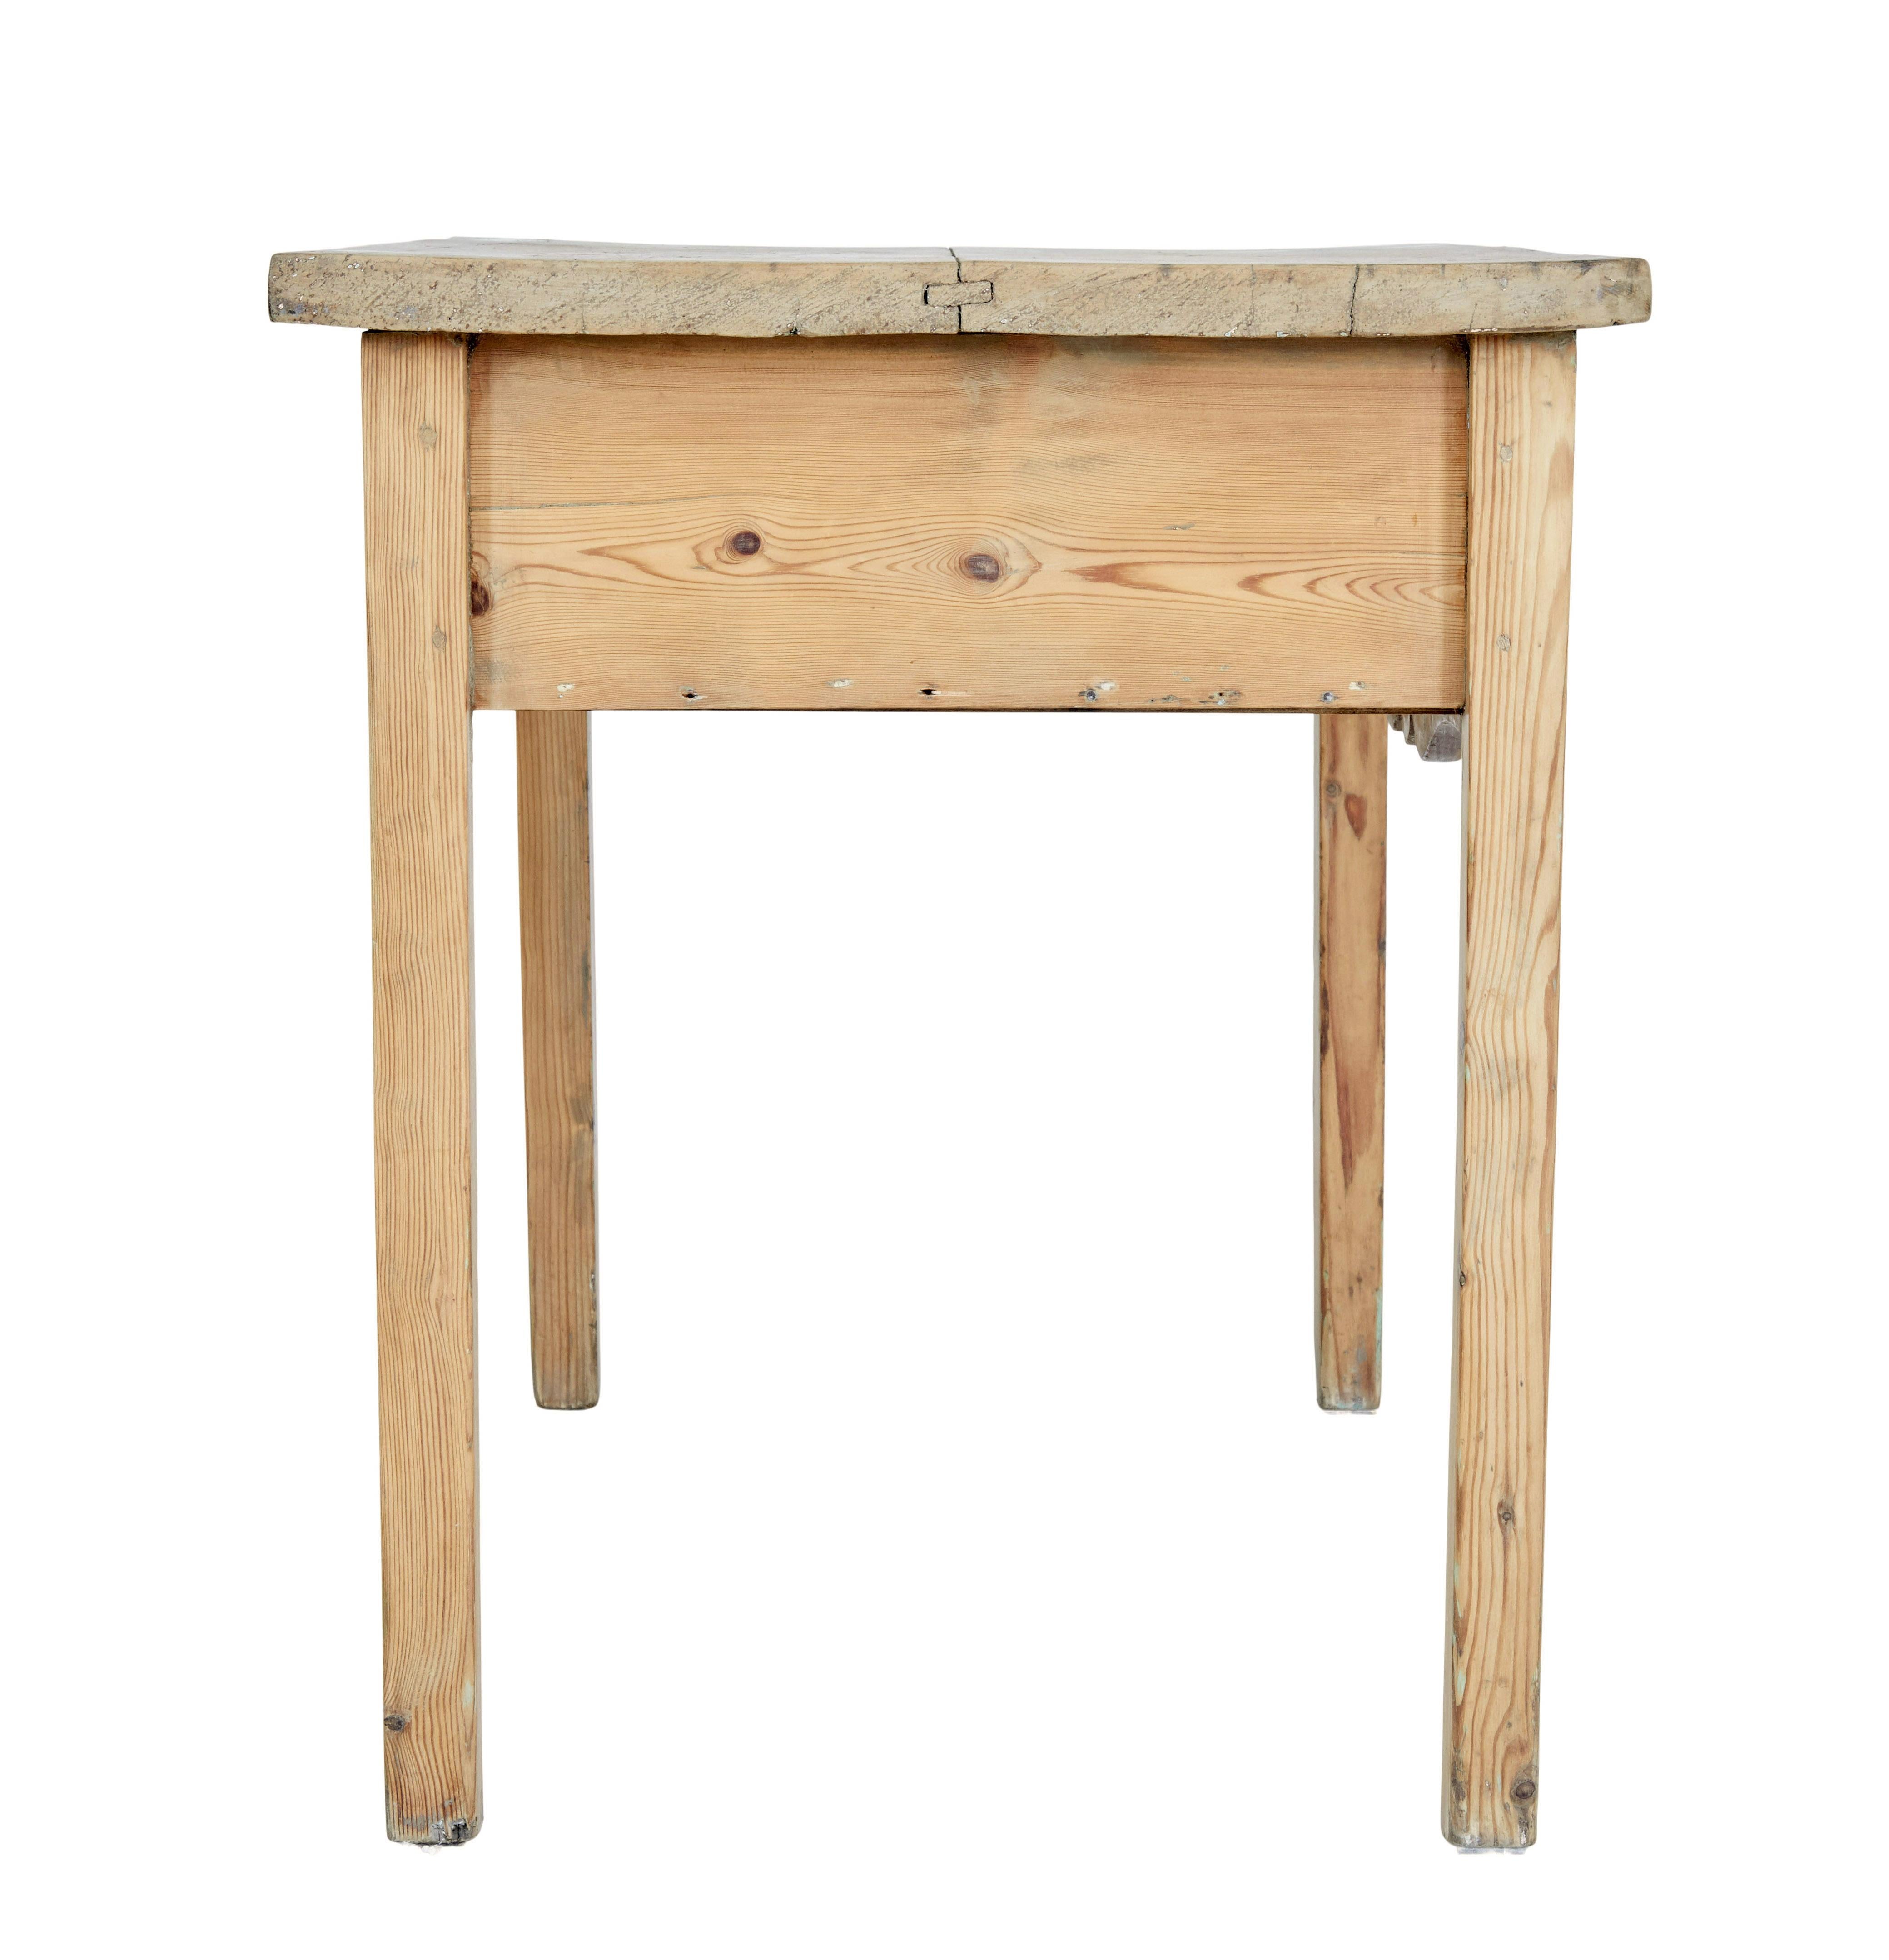 Rustic 19th century Victorian pine kitchen table For Sale 1